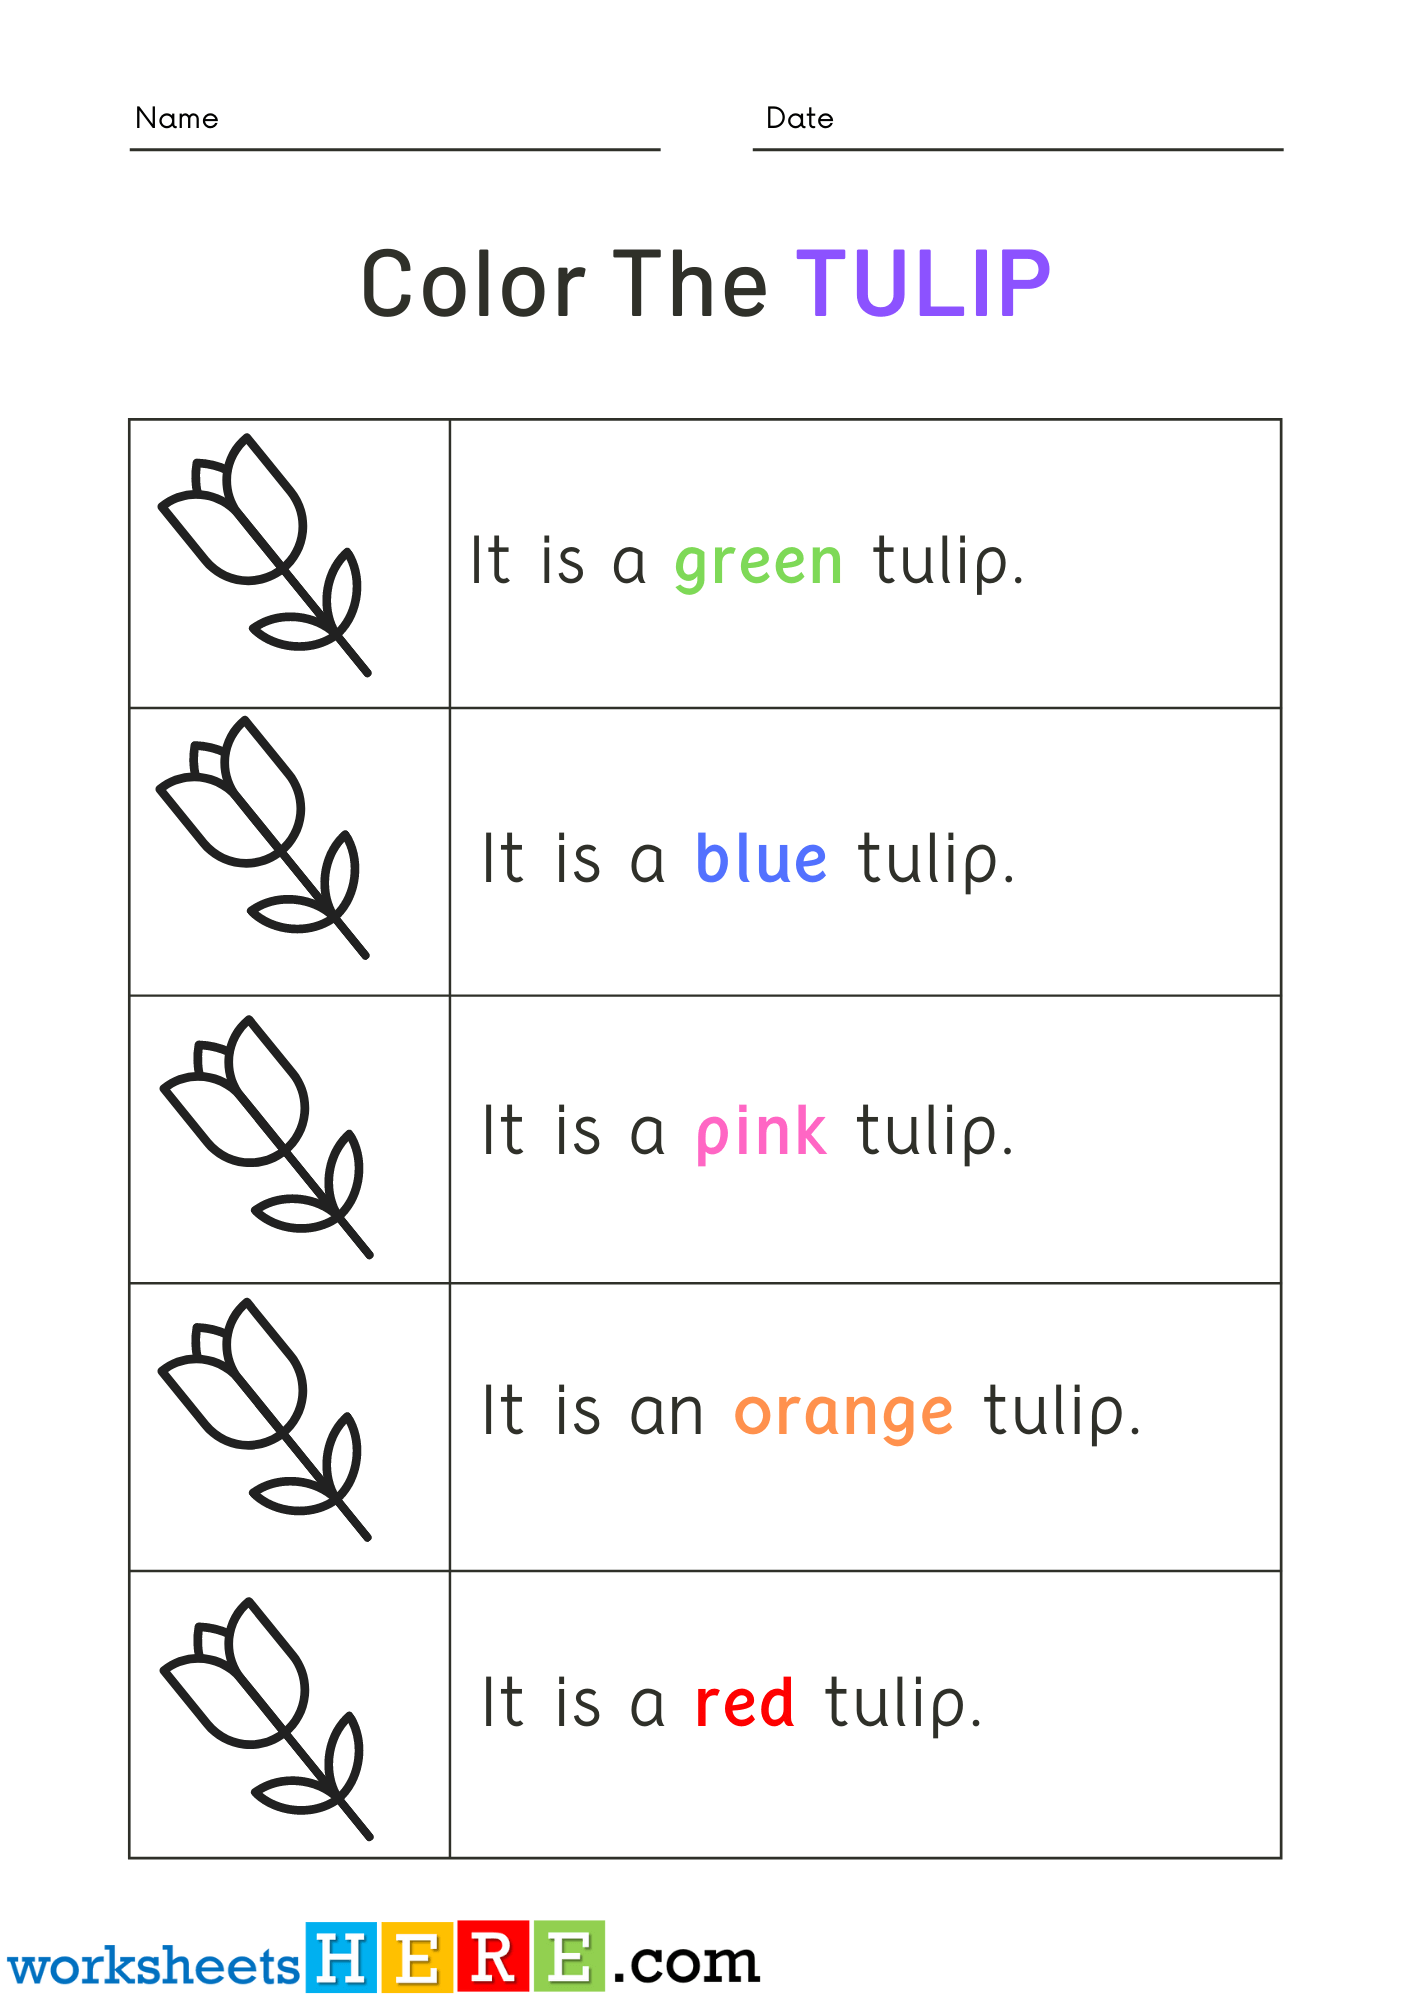 Read Words and Color Tulip Pictures Activity PDF Worksheets For Kindergarten